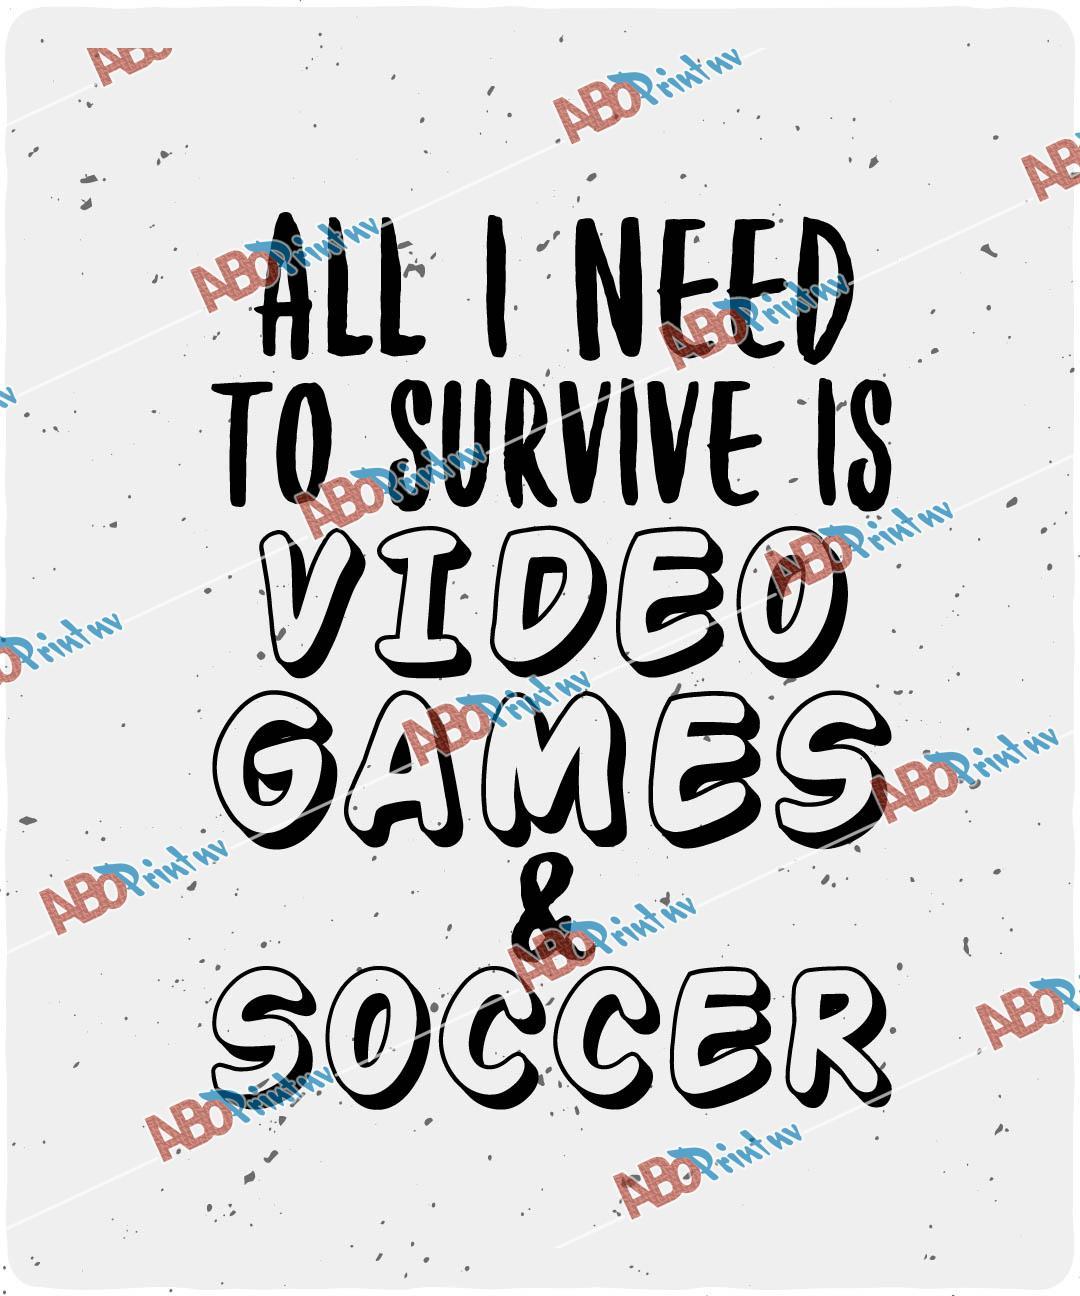 All I need to survive is video games & soccer.jpg